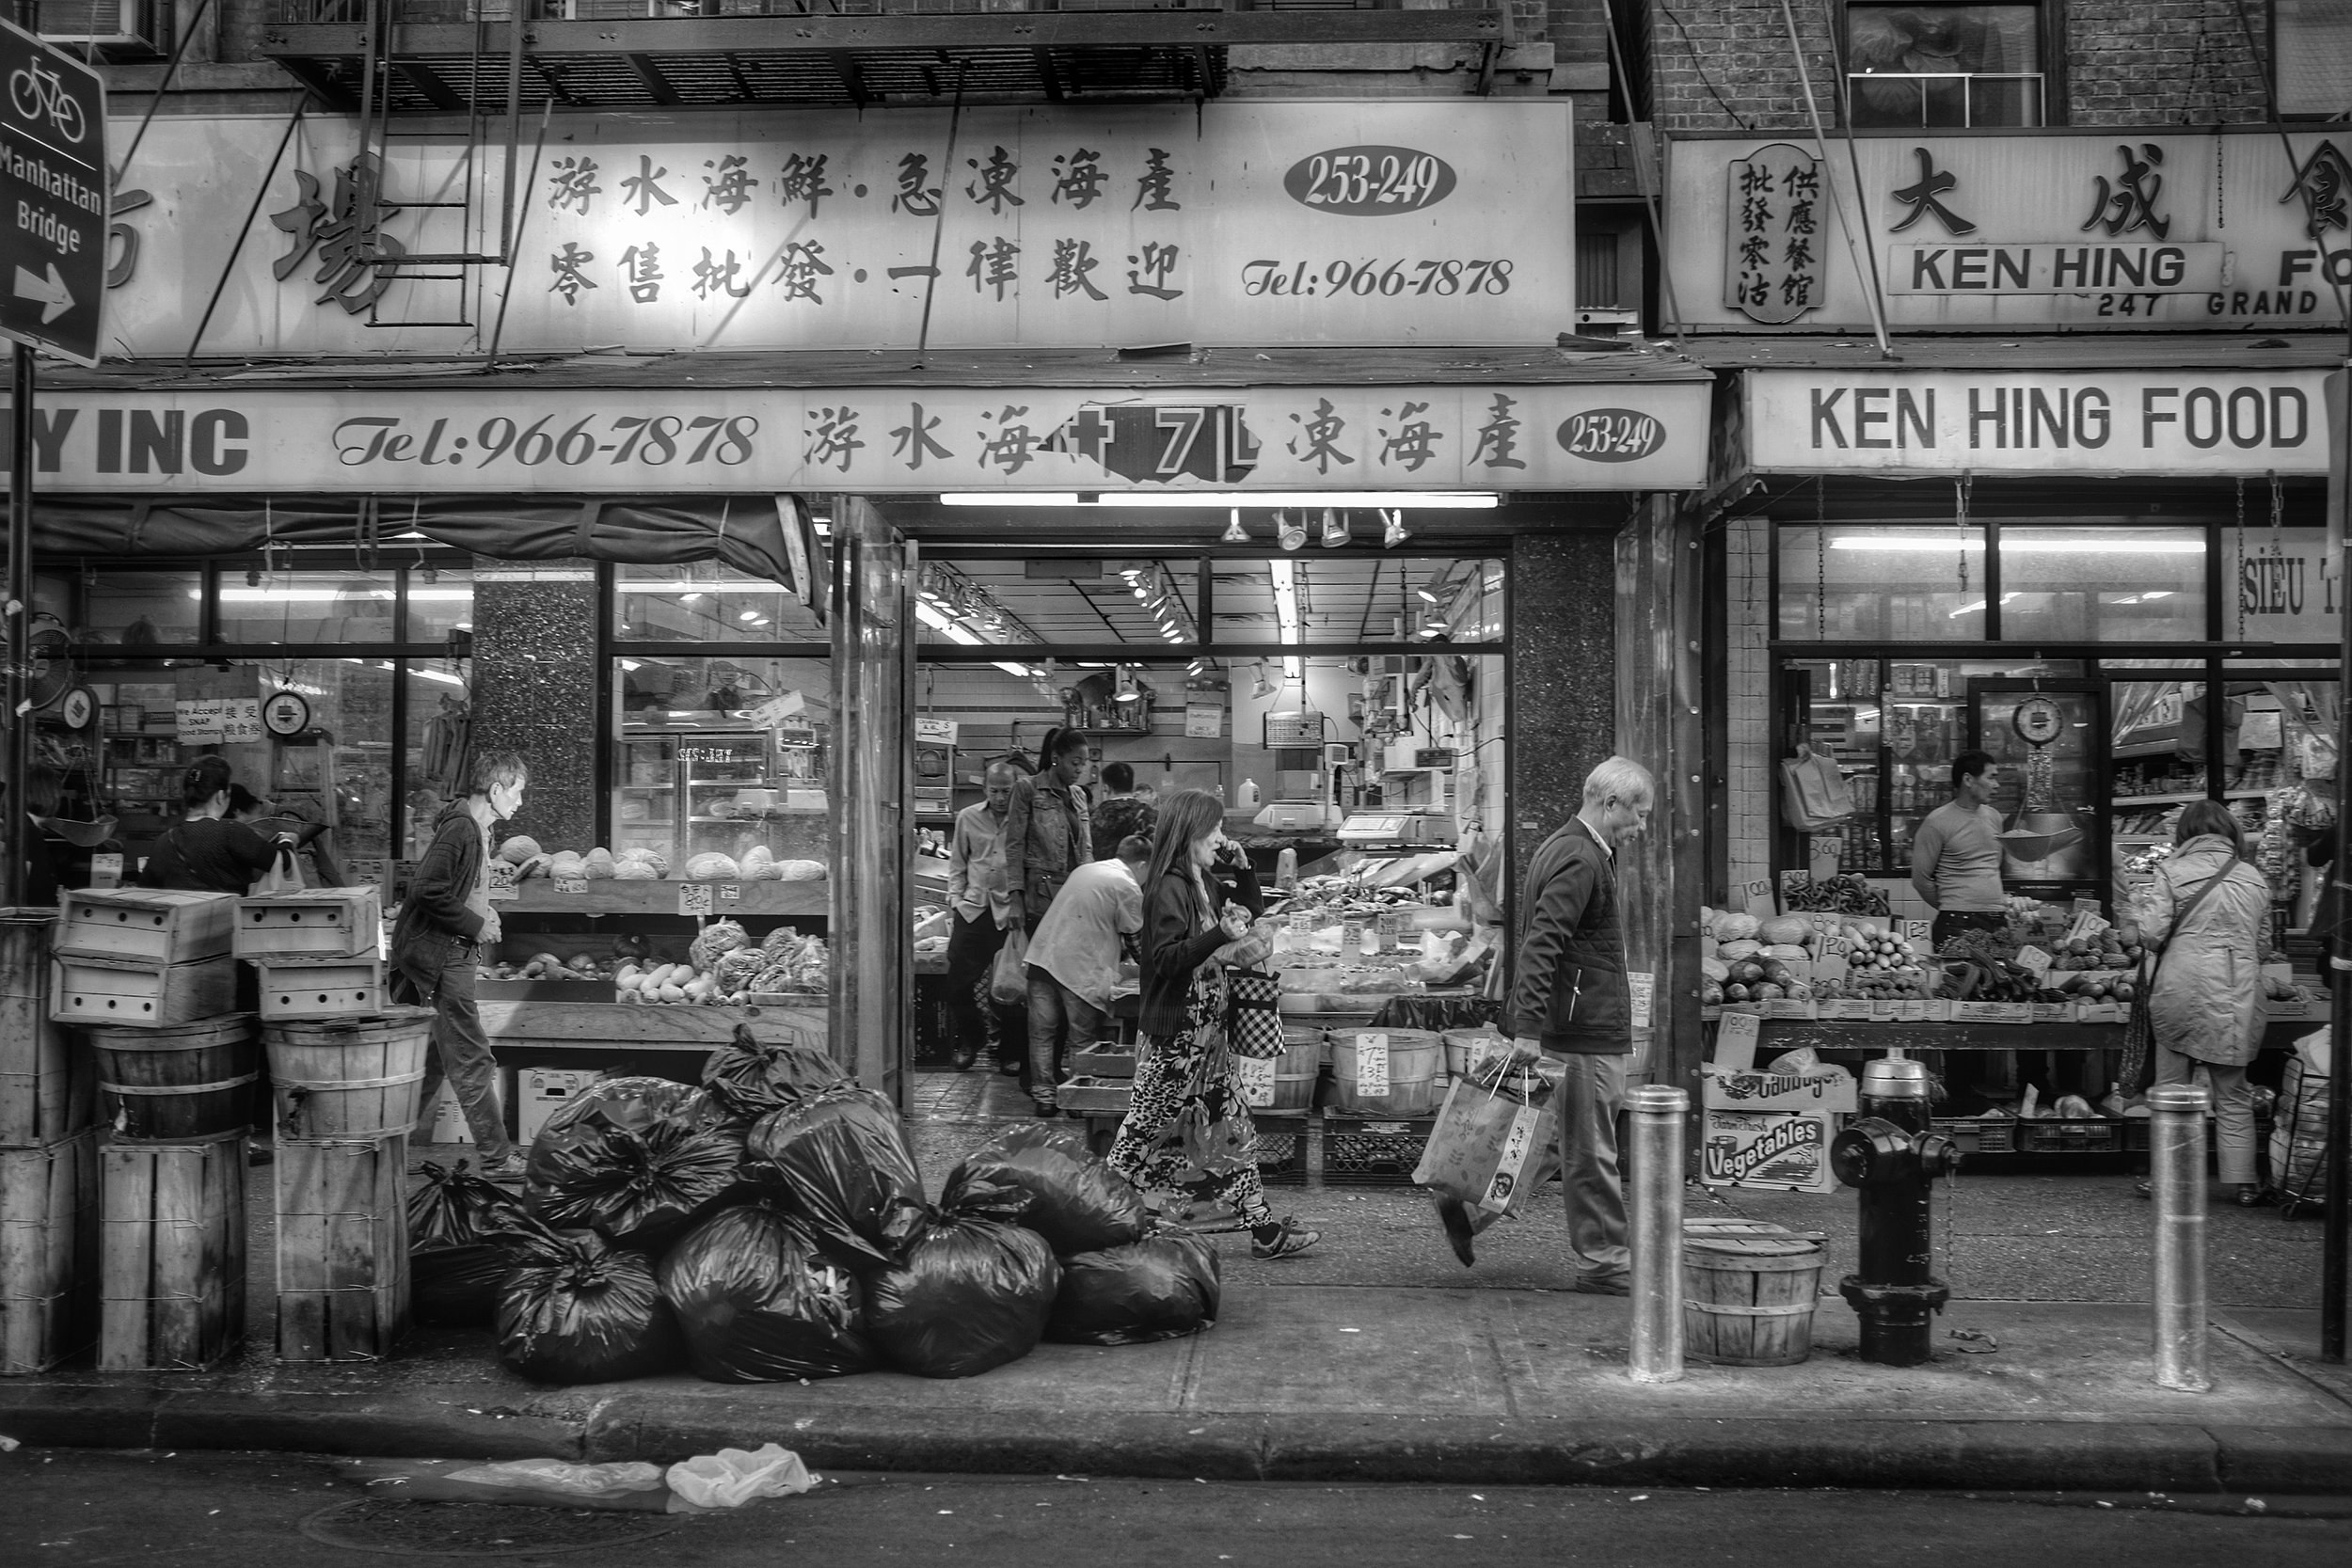 Ken Hing Food. Canal Street. Chinatown. New York City. 2016.